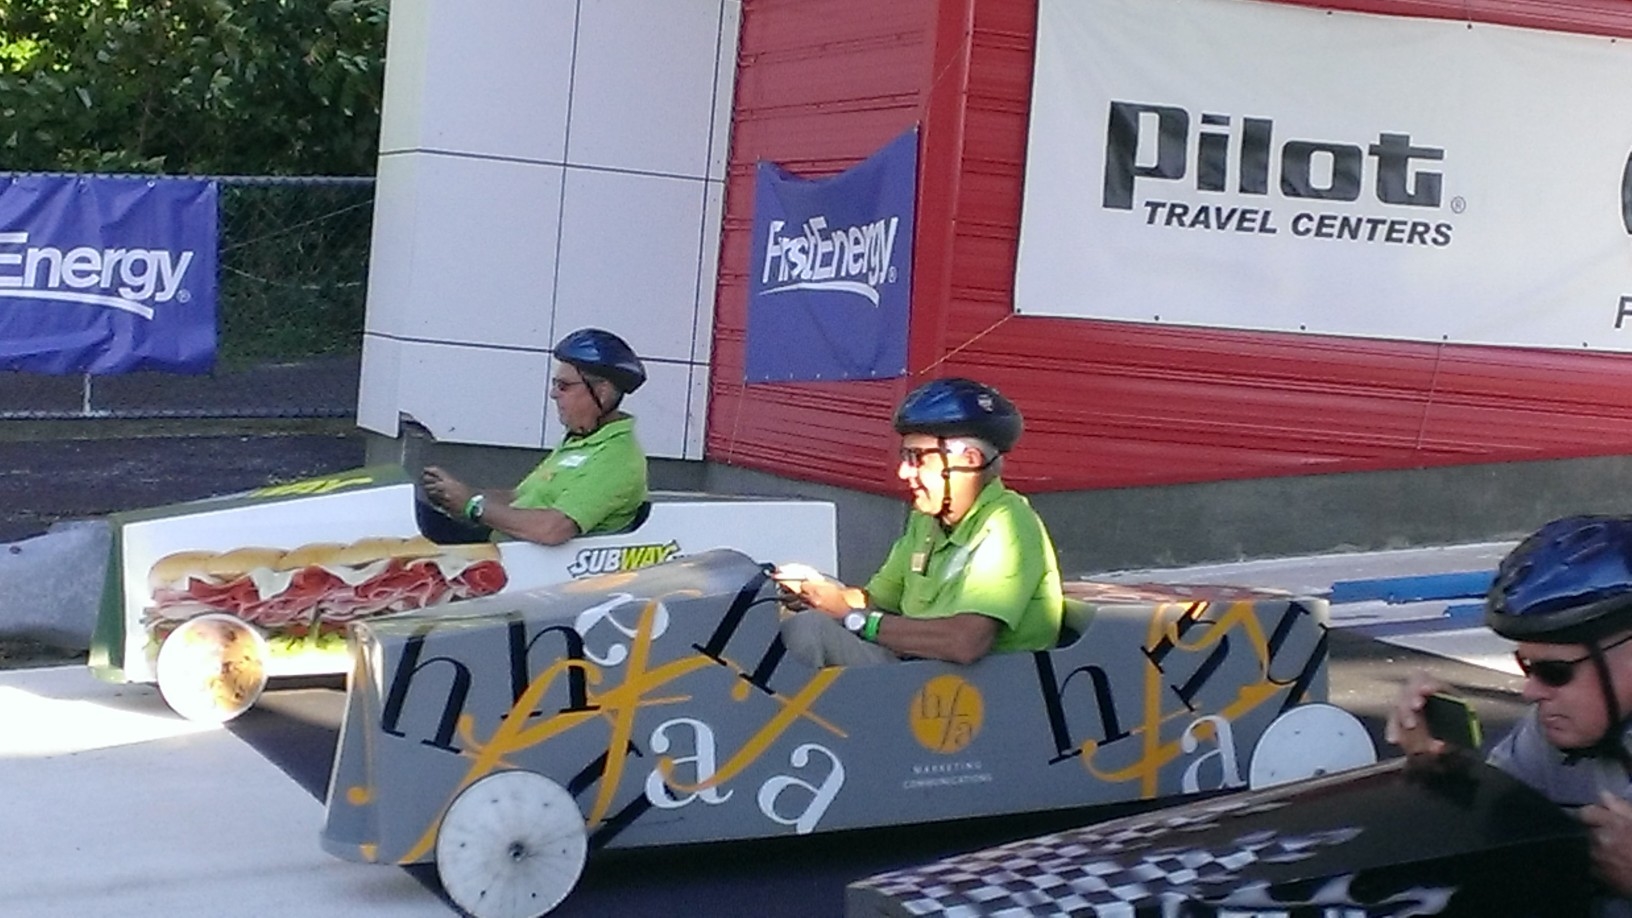 Baird associates and clients enjoyed “The Thrill of the Hill” Soap Box Derby event.